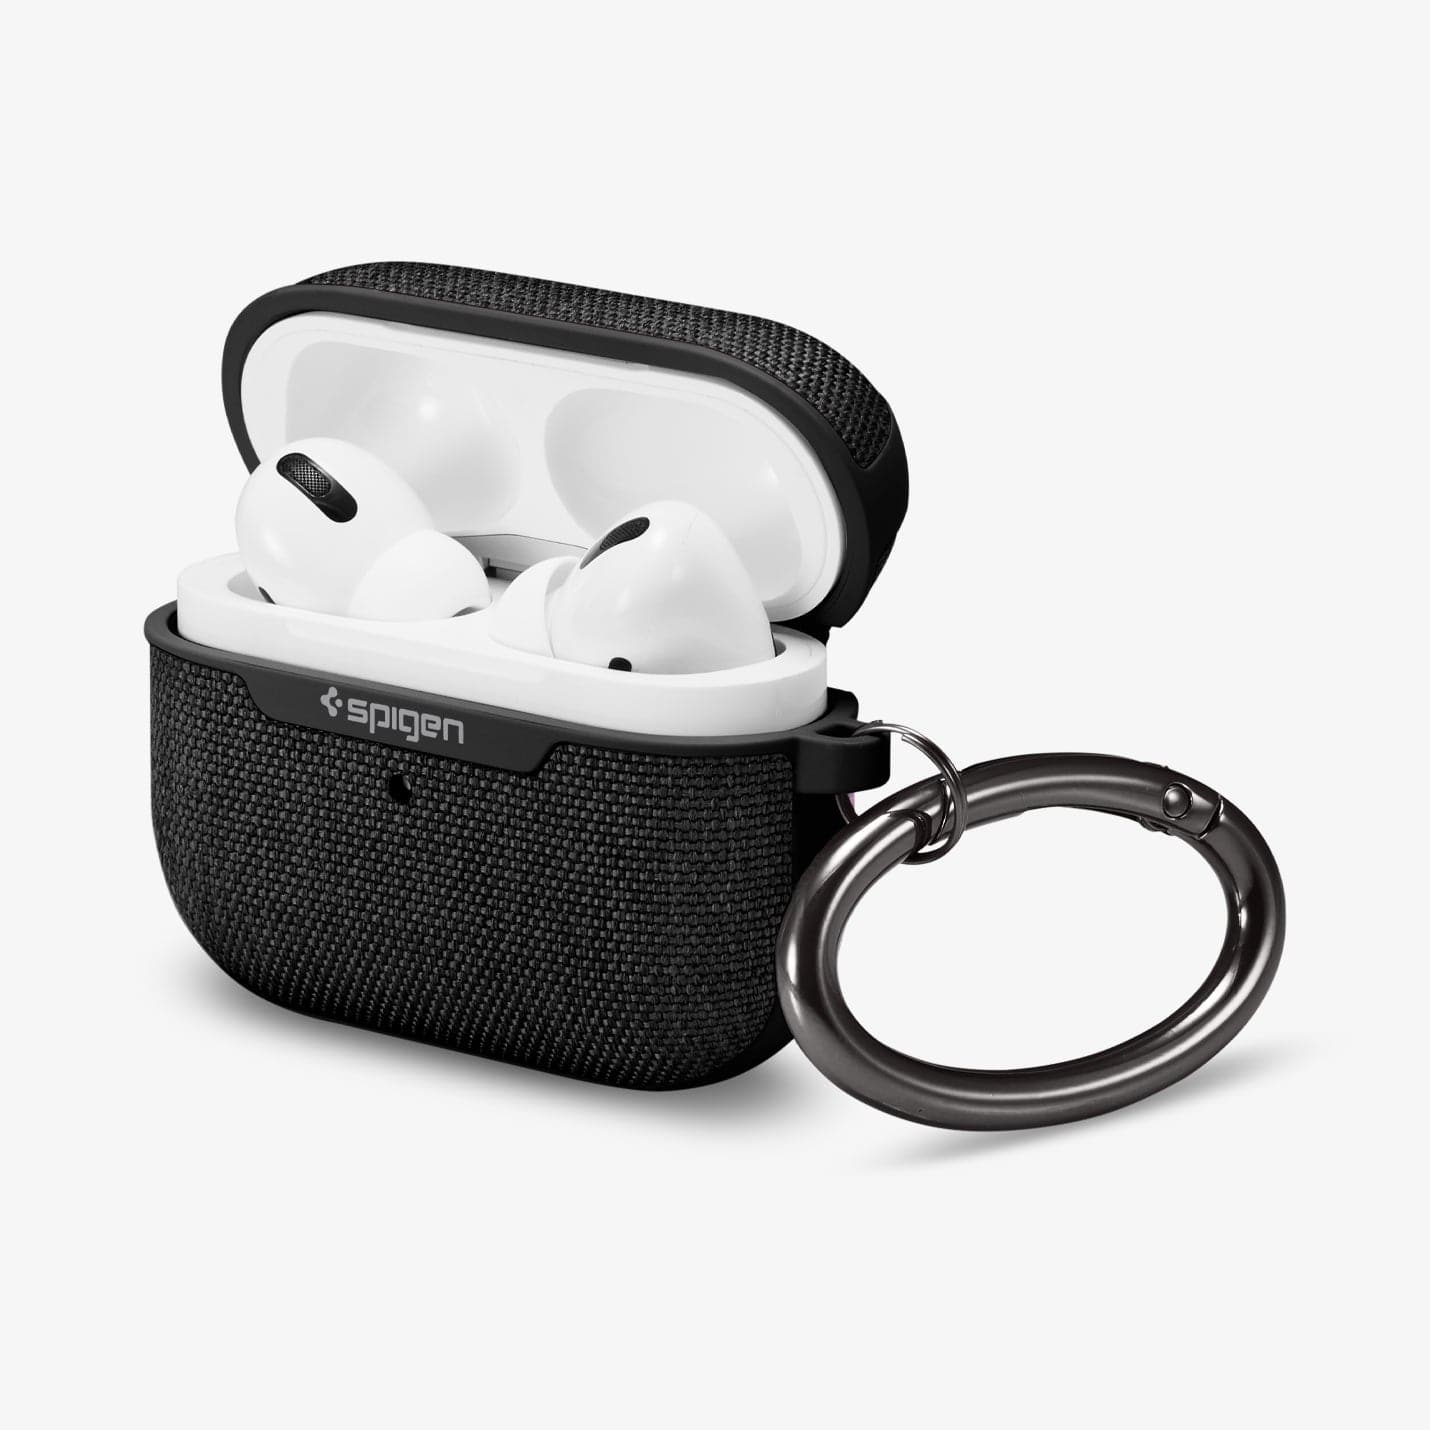 ASD00572 - Apple AirPods Pro Case Urban Fit in black showing the front, carabiner and top open with AirPods inside